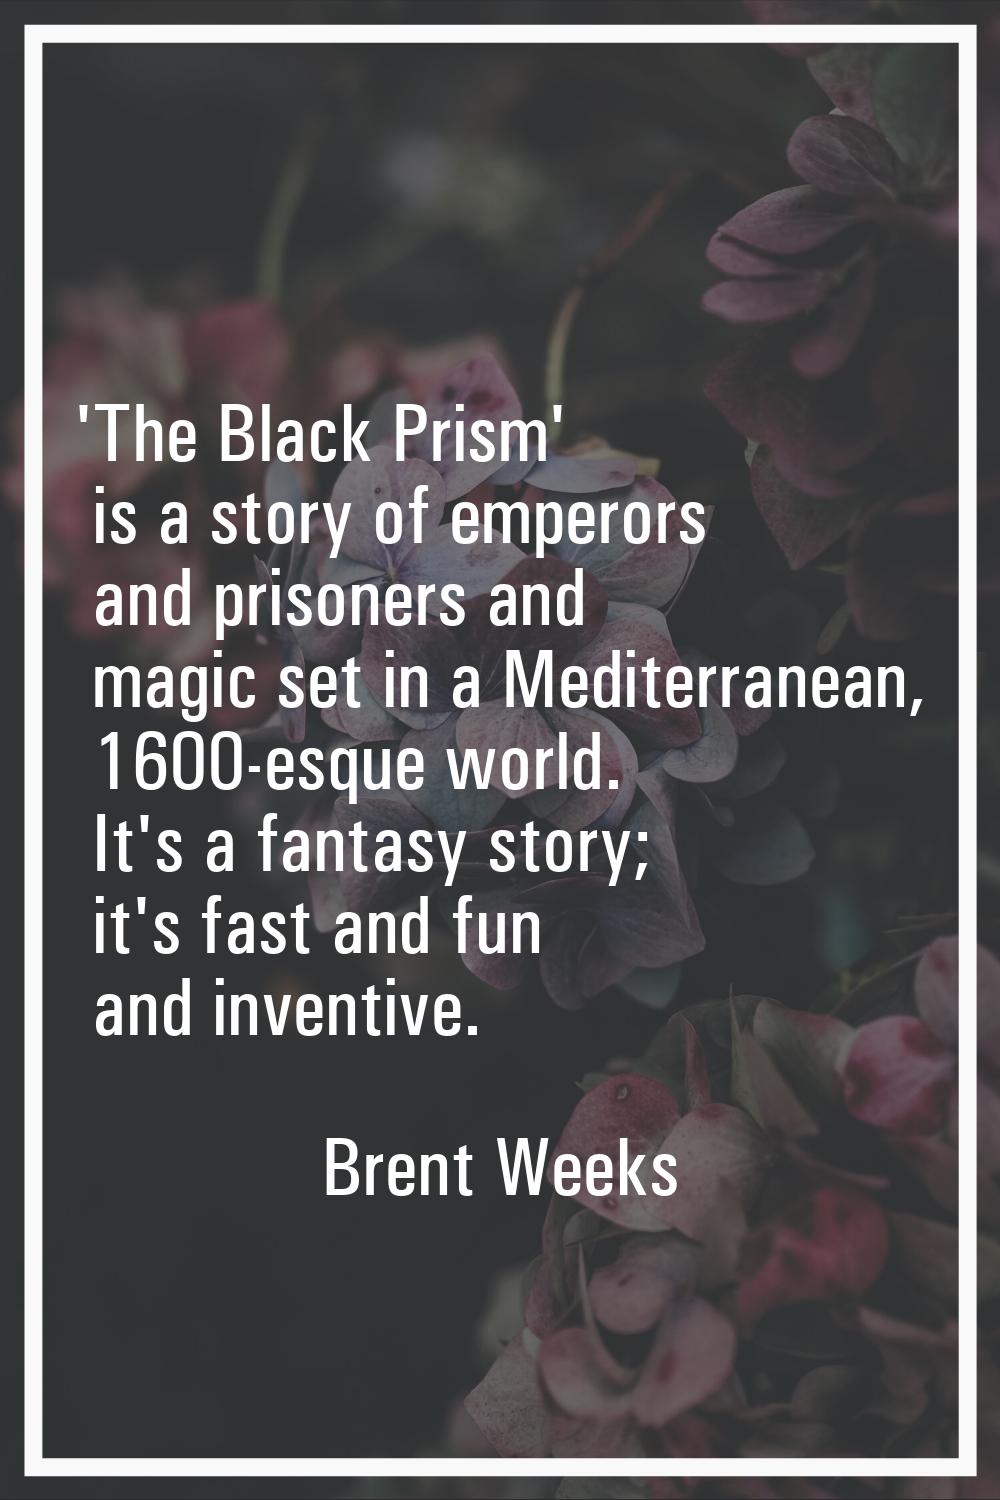 'The Black Prism' is a story of emperors and prisoners and magic set in a Mediterranean, 1600-esque